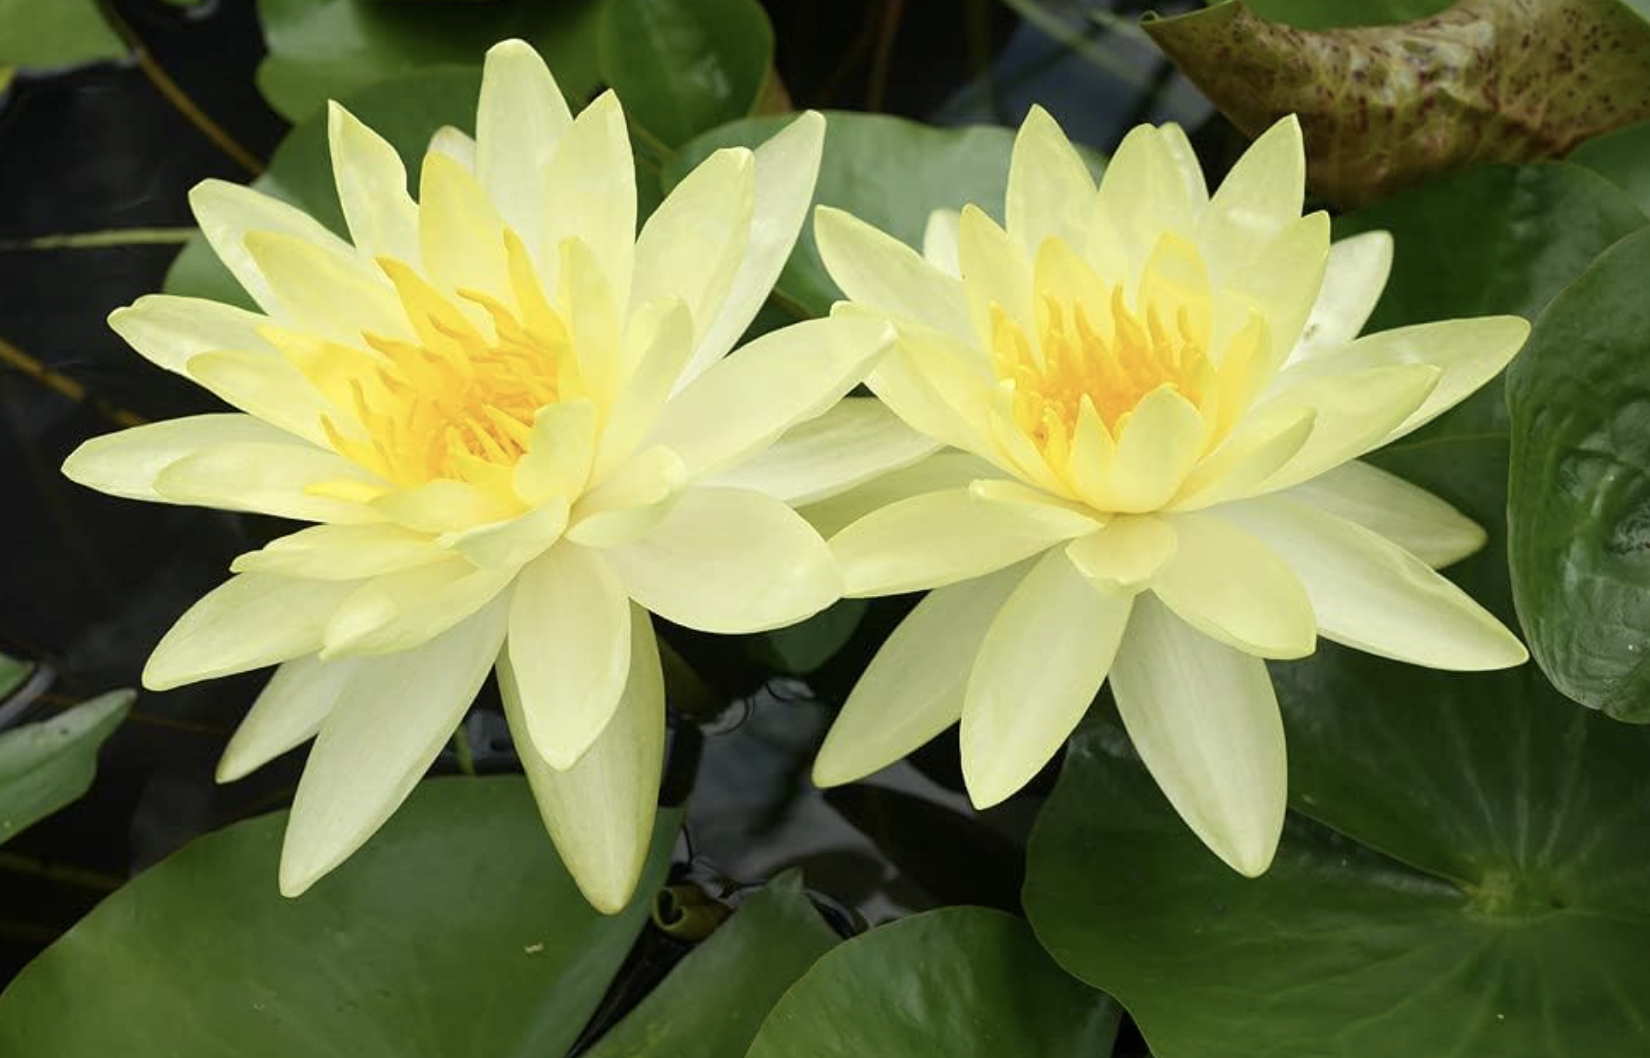 Photo of lemon yellow water lilies in a garden pond